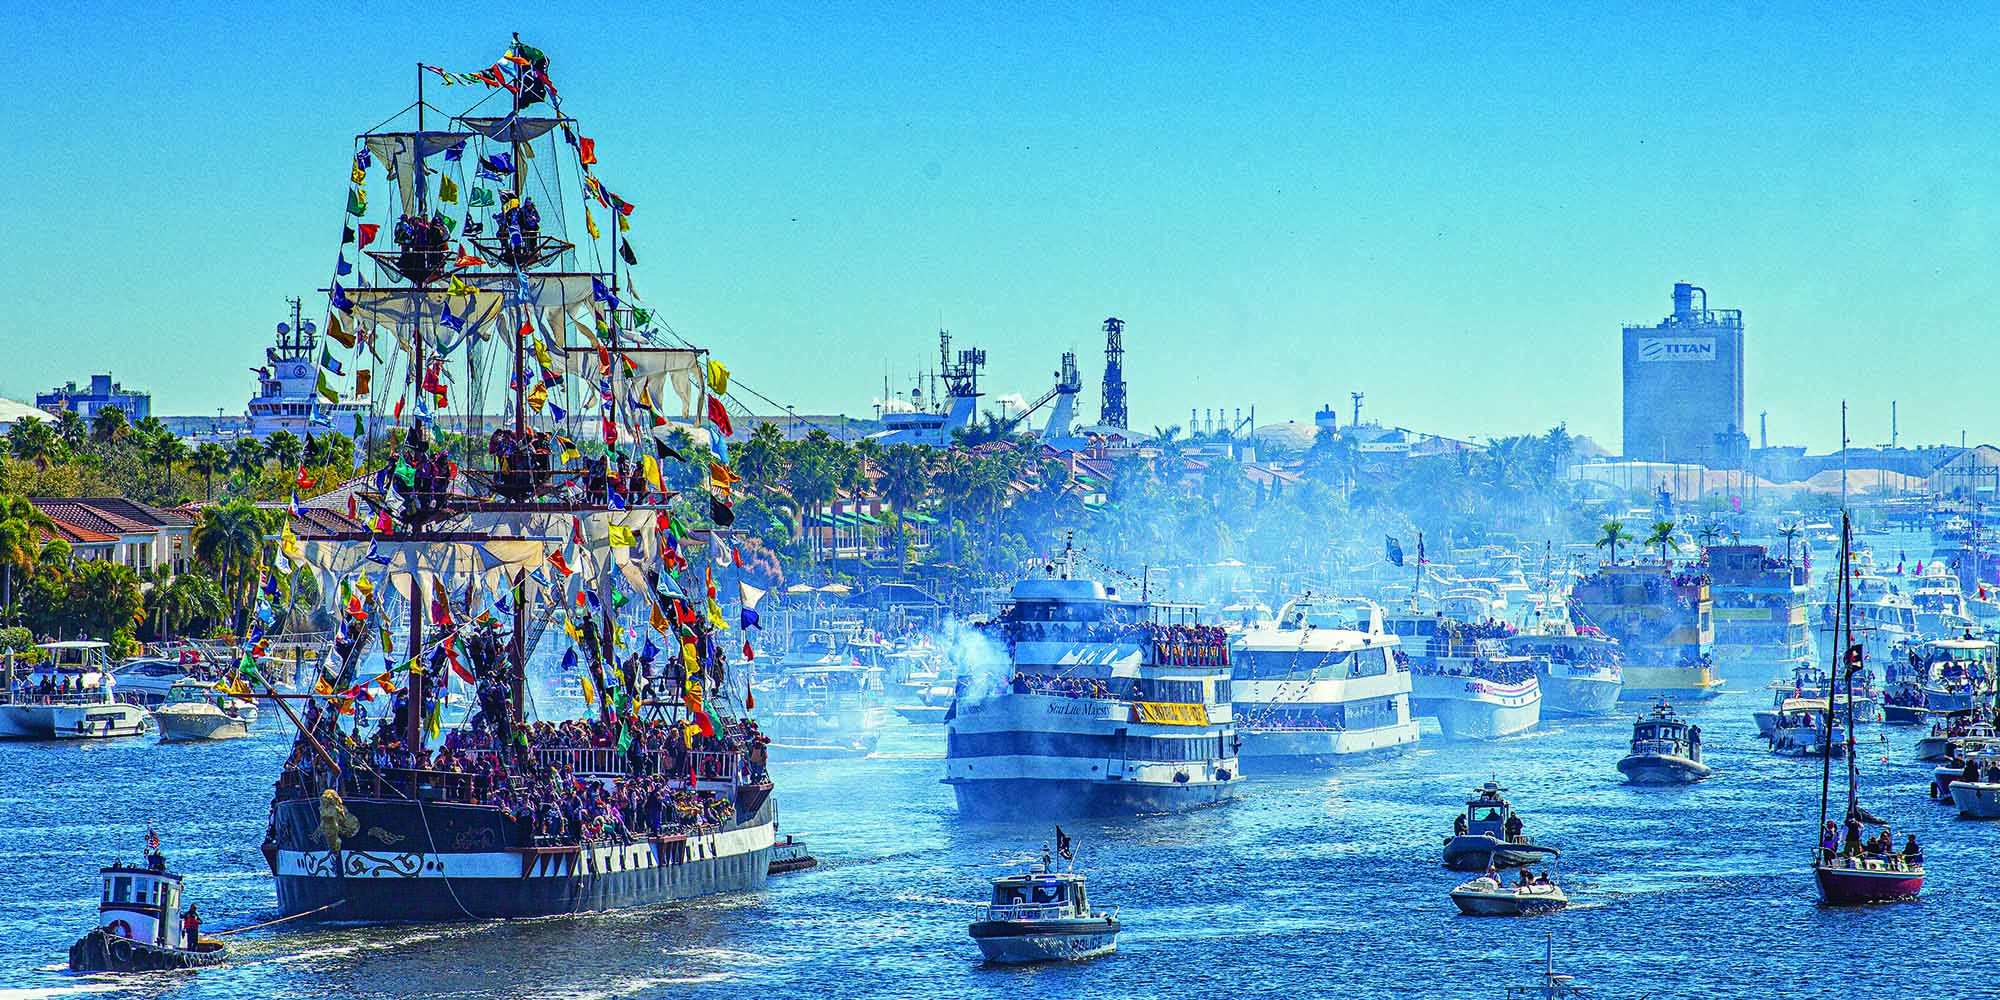 The invasion, the largest boat parade in the U.S., is shown in 2020. 